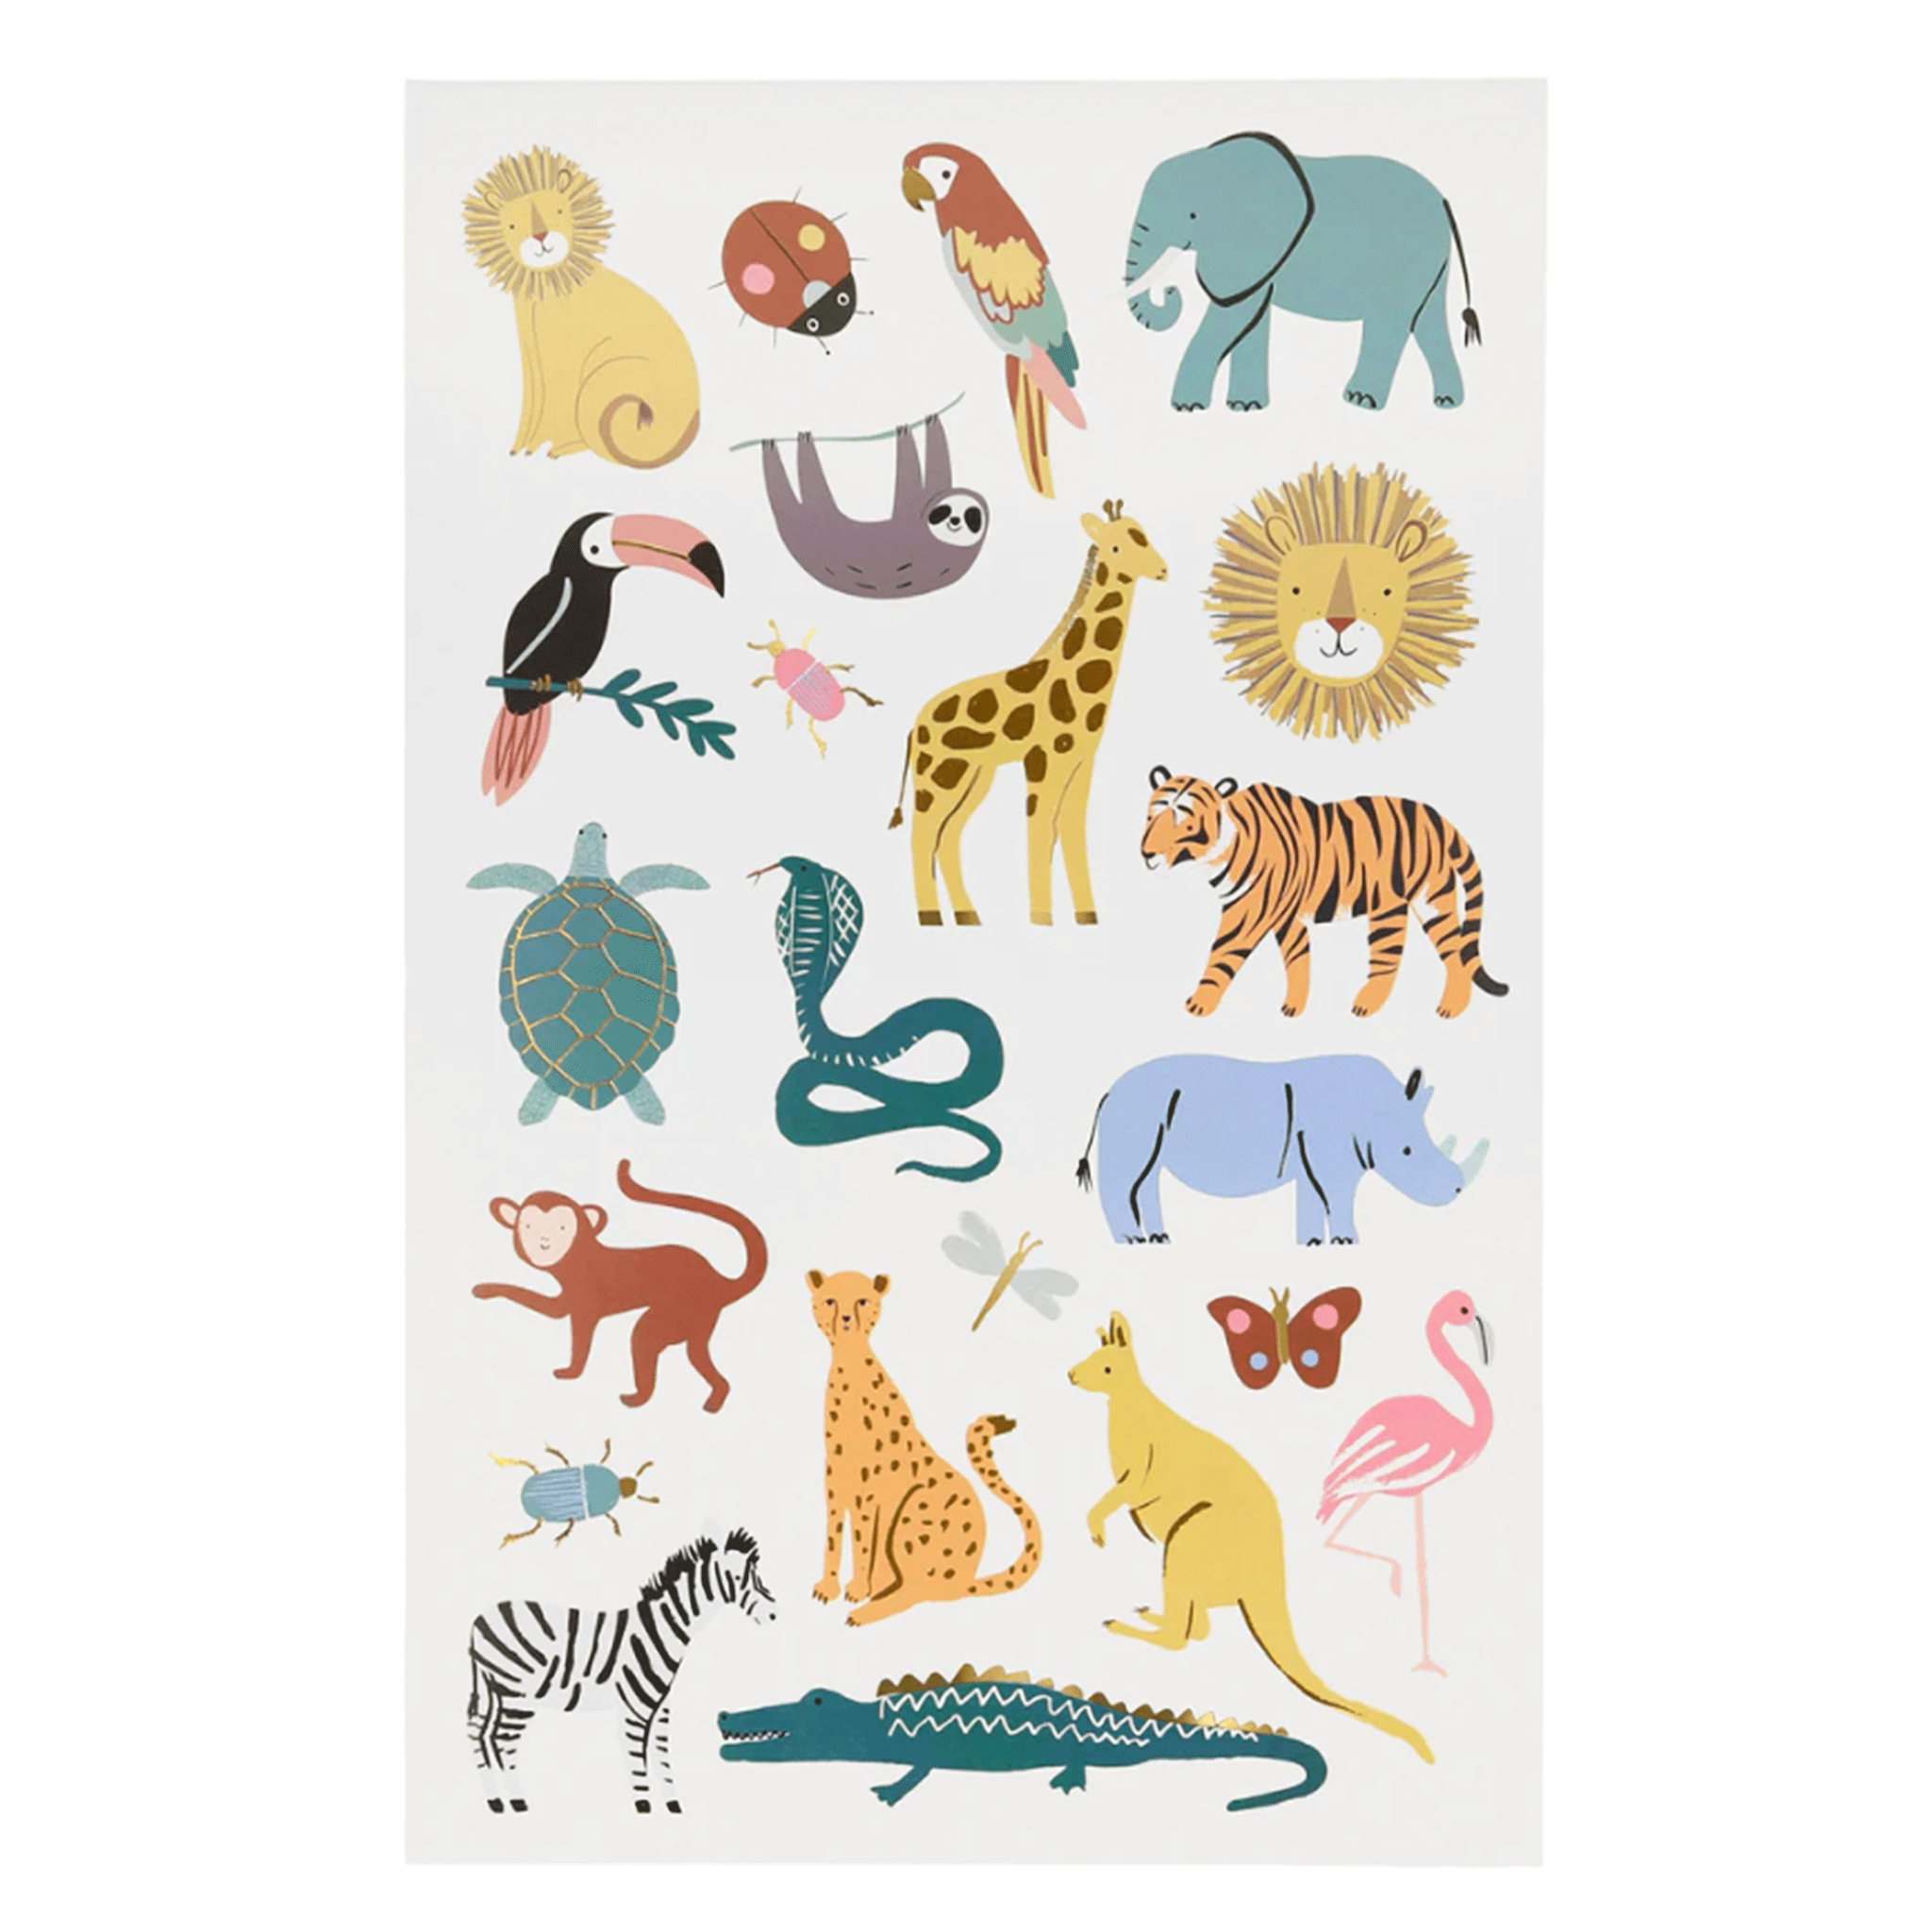 On a white background is a sheet of temporary tattoos shaped like wild animals. 